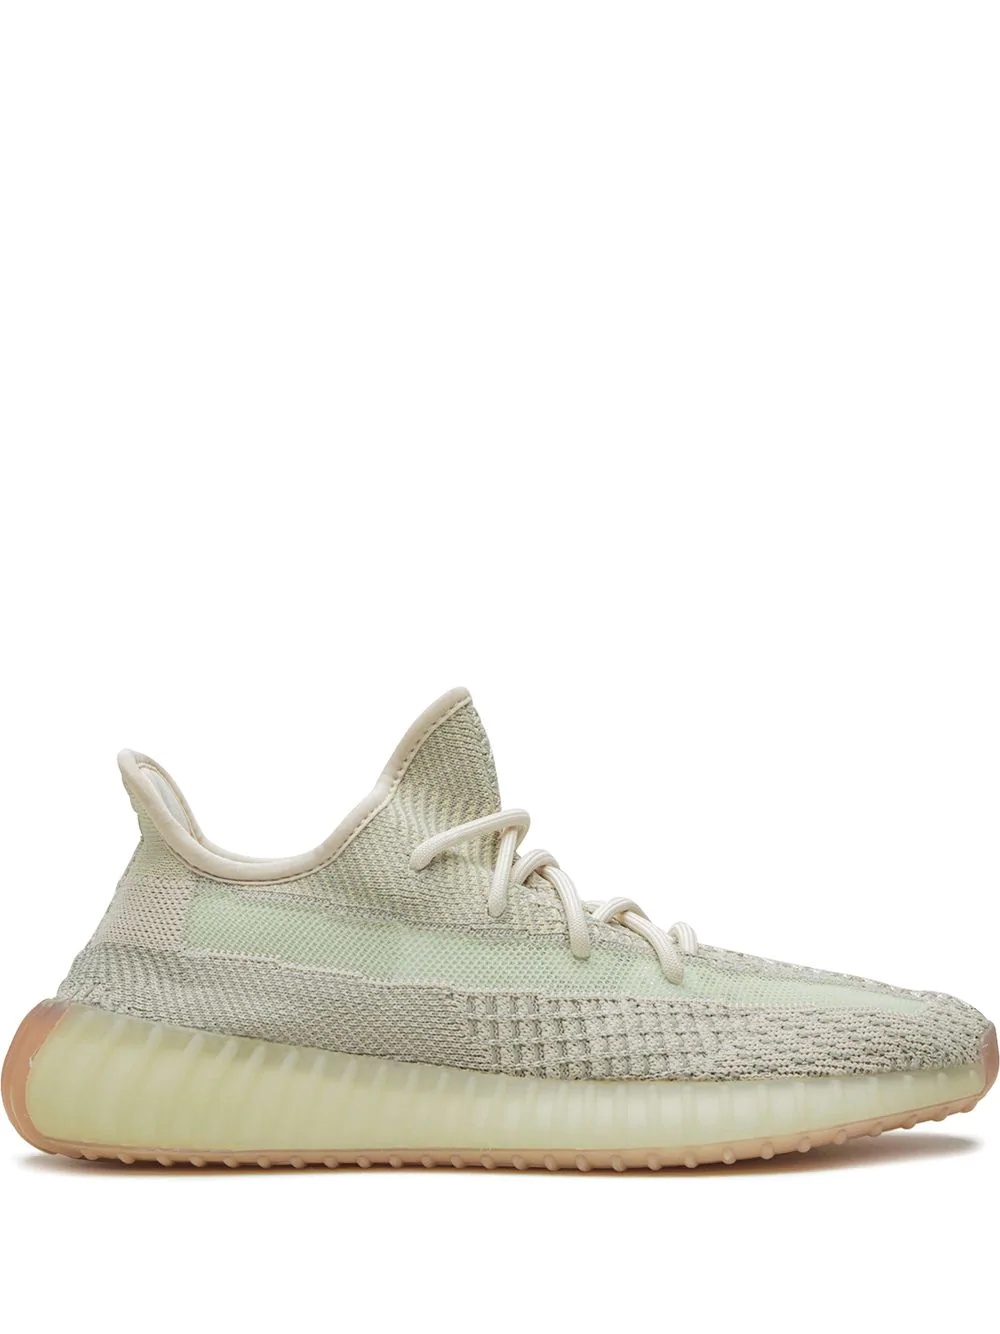 Yeezy Boost 350 V2 "Citrin" sneakers - 1